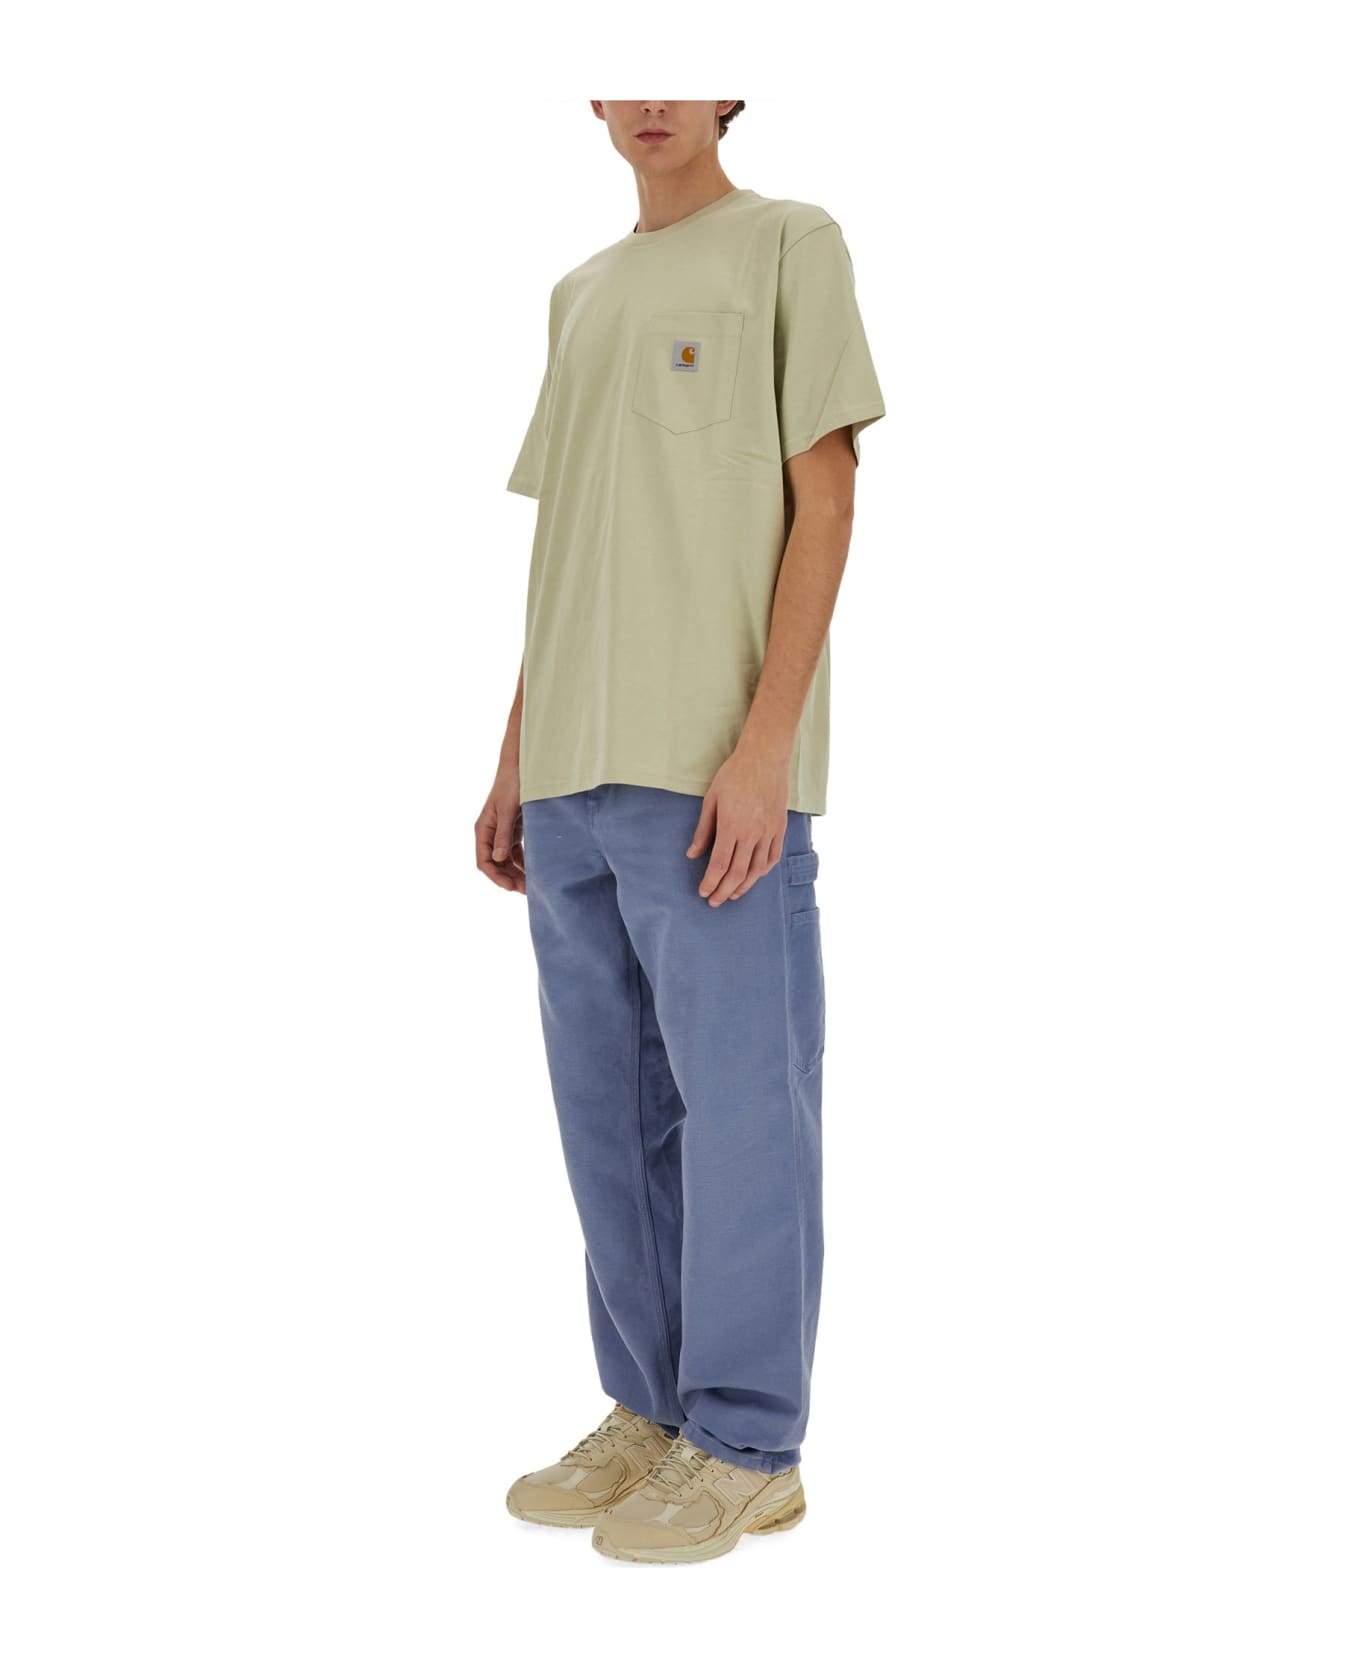 Carhartt Pants 'dearborn' - Bay Blue Aged Canvas ボトムス